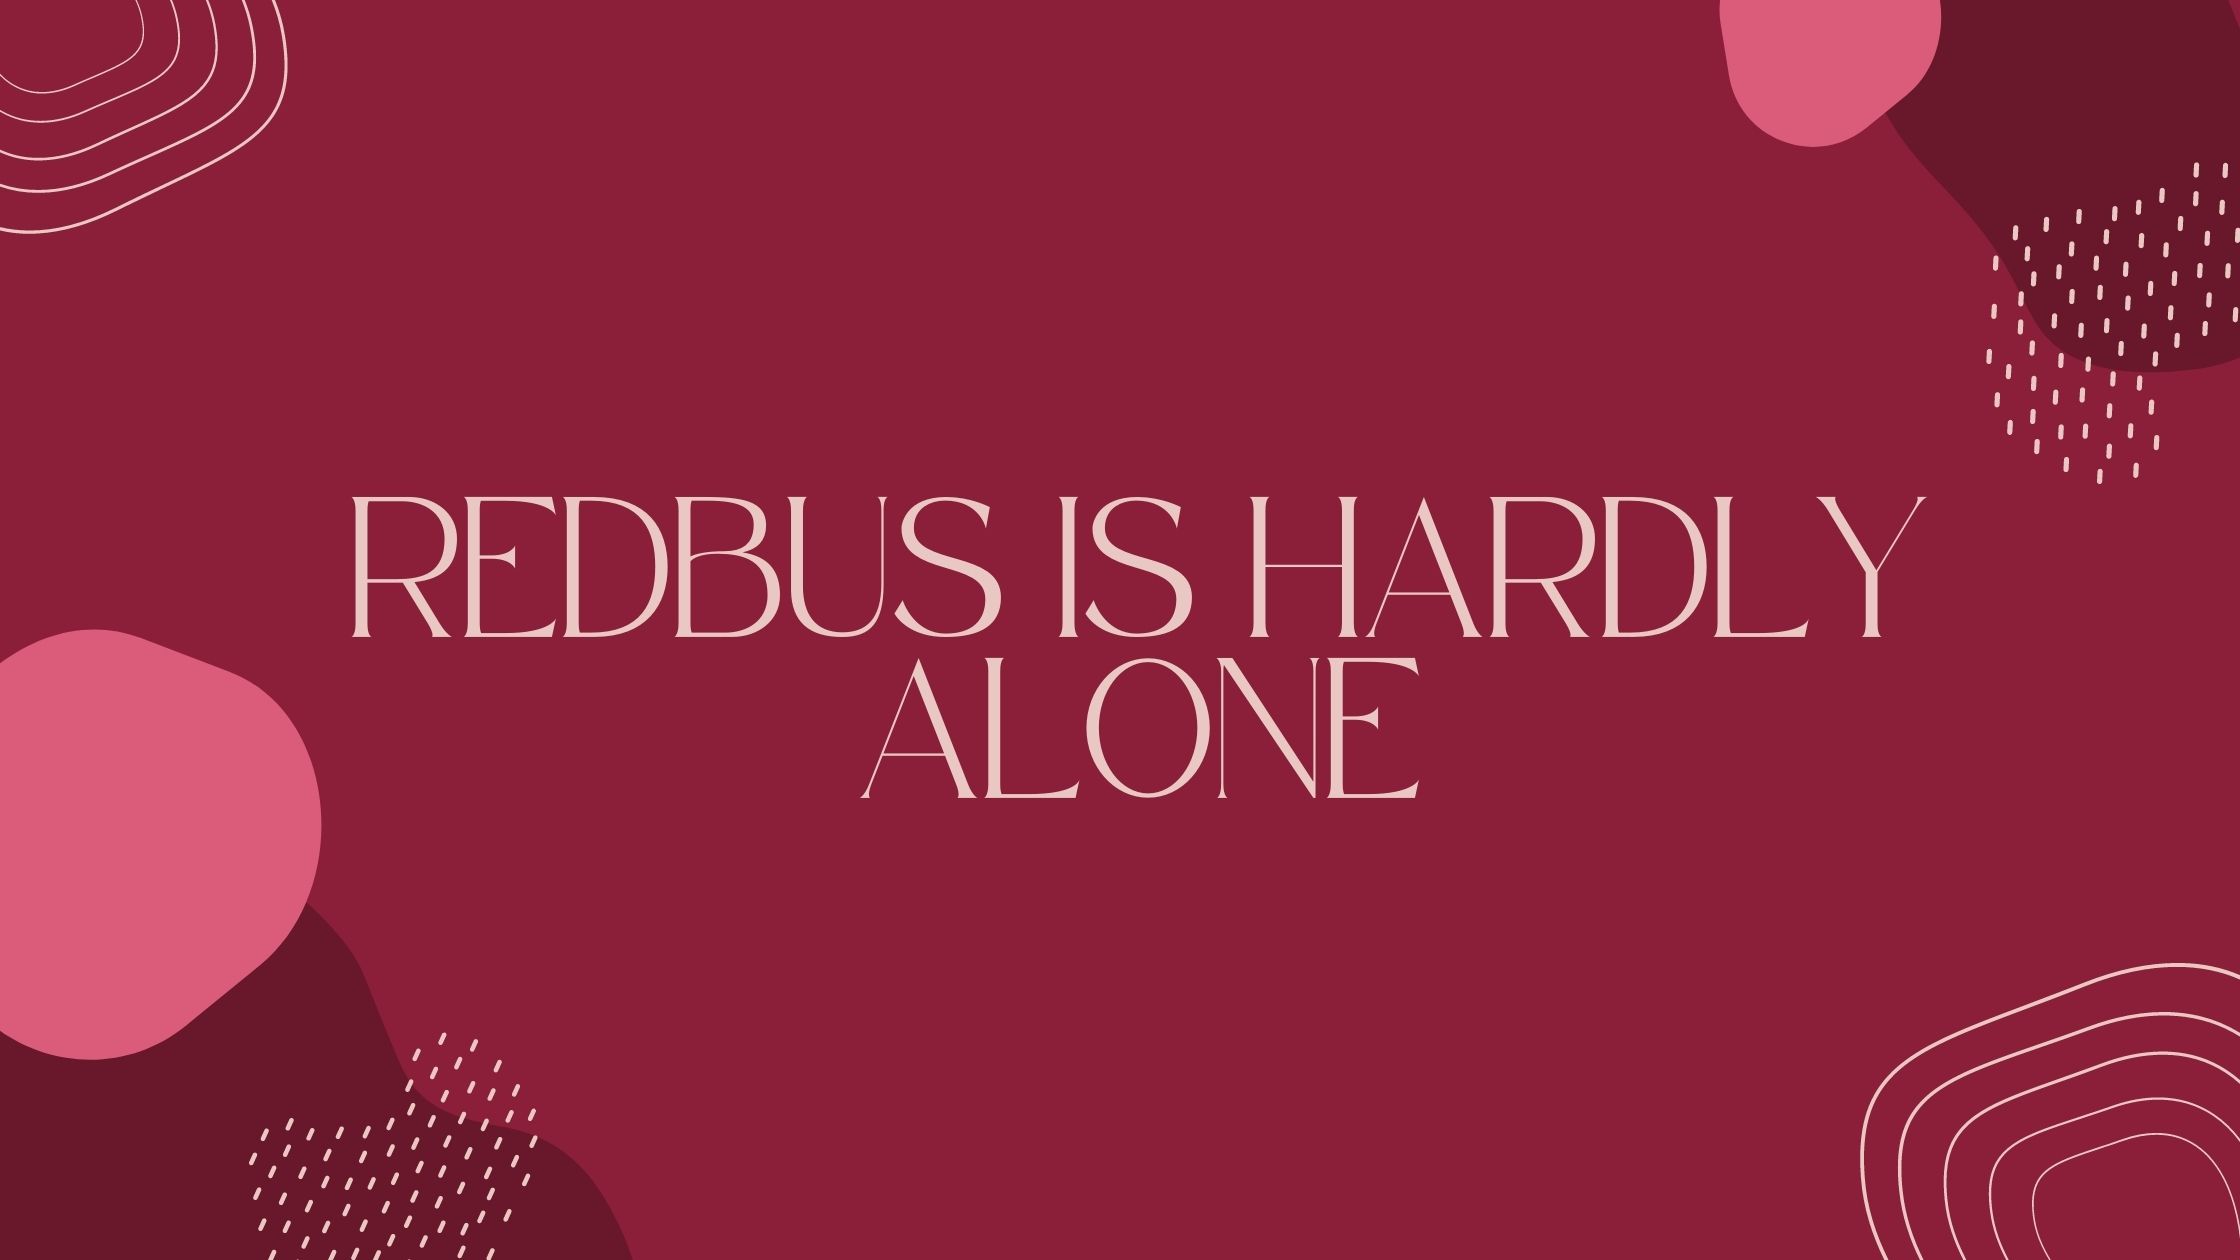 RedBus is hardly alone